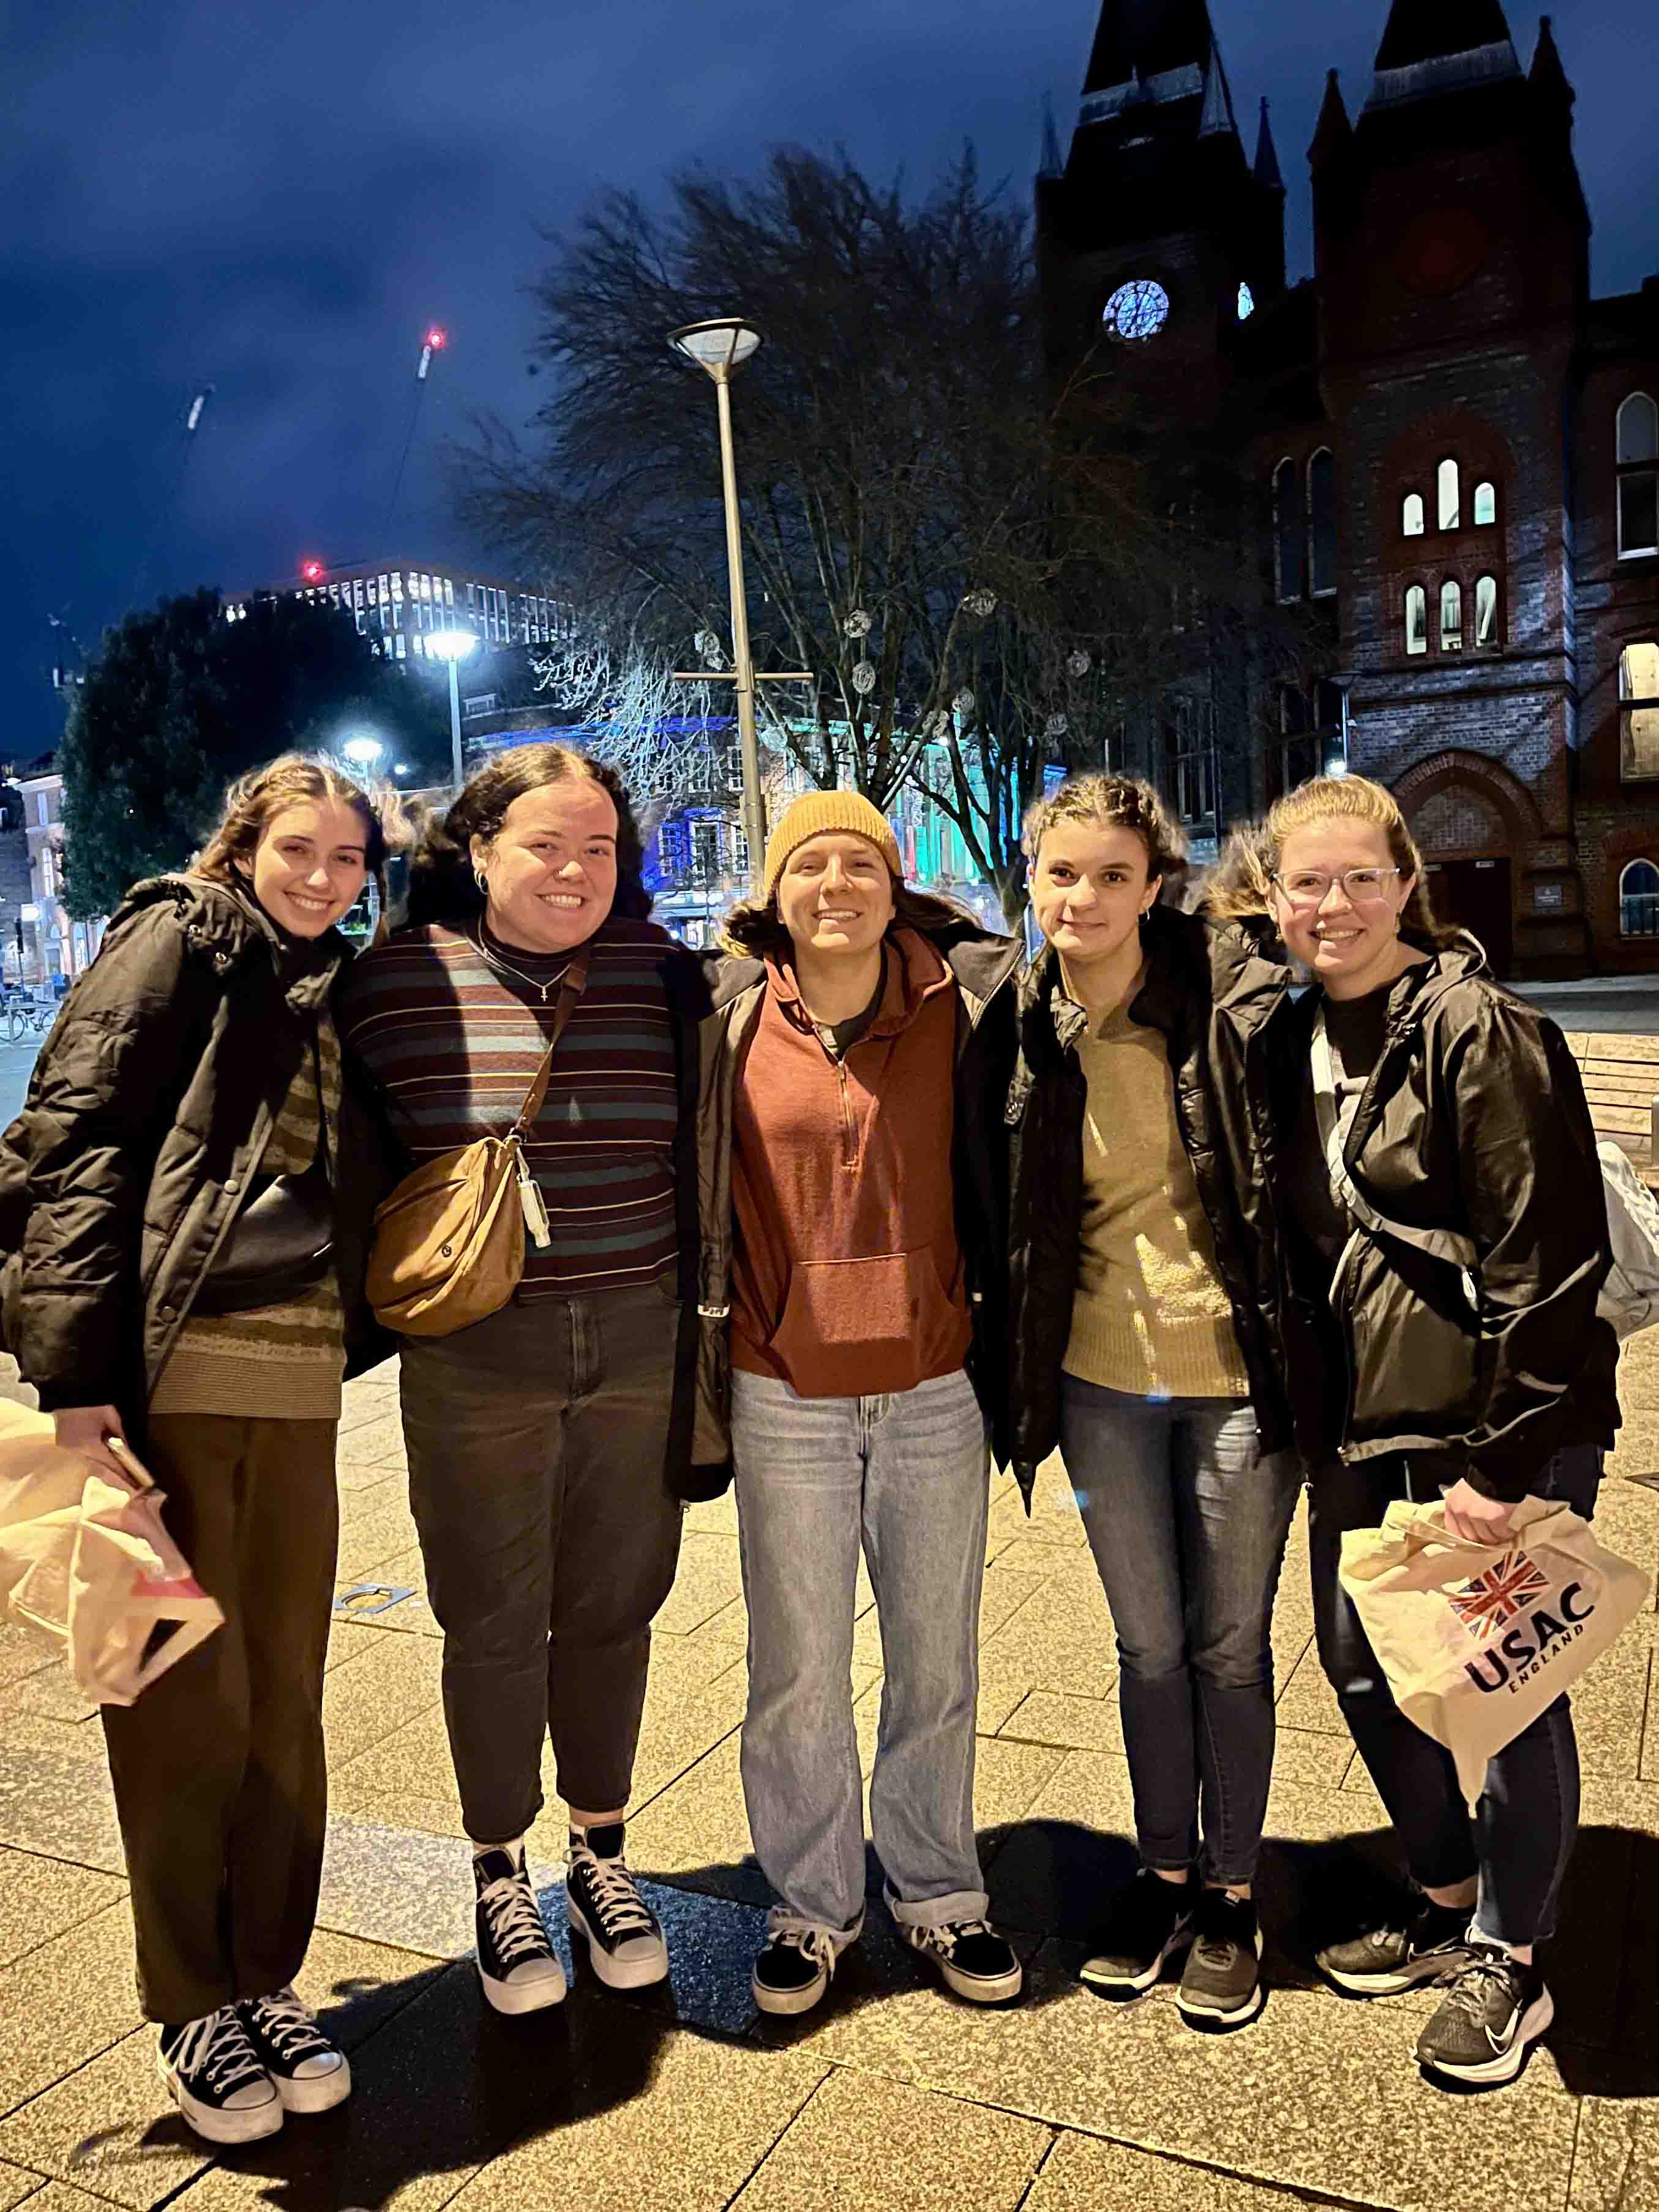 Students enjoying a night out in Reading, England.